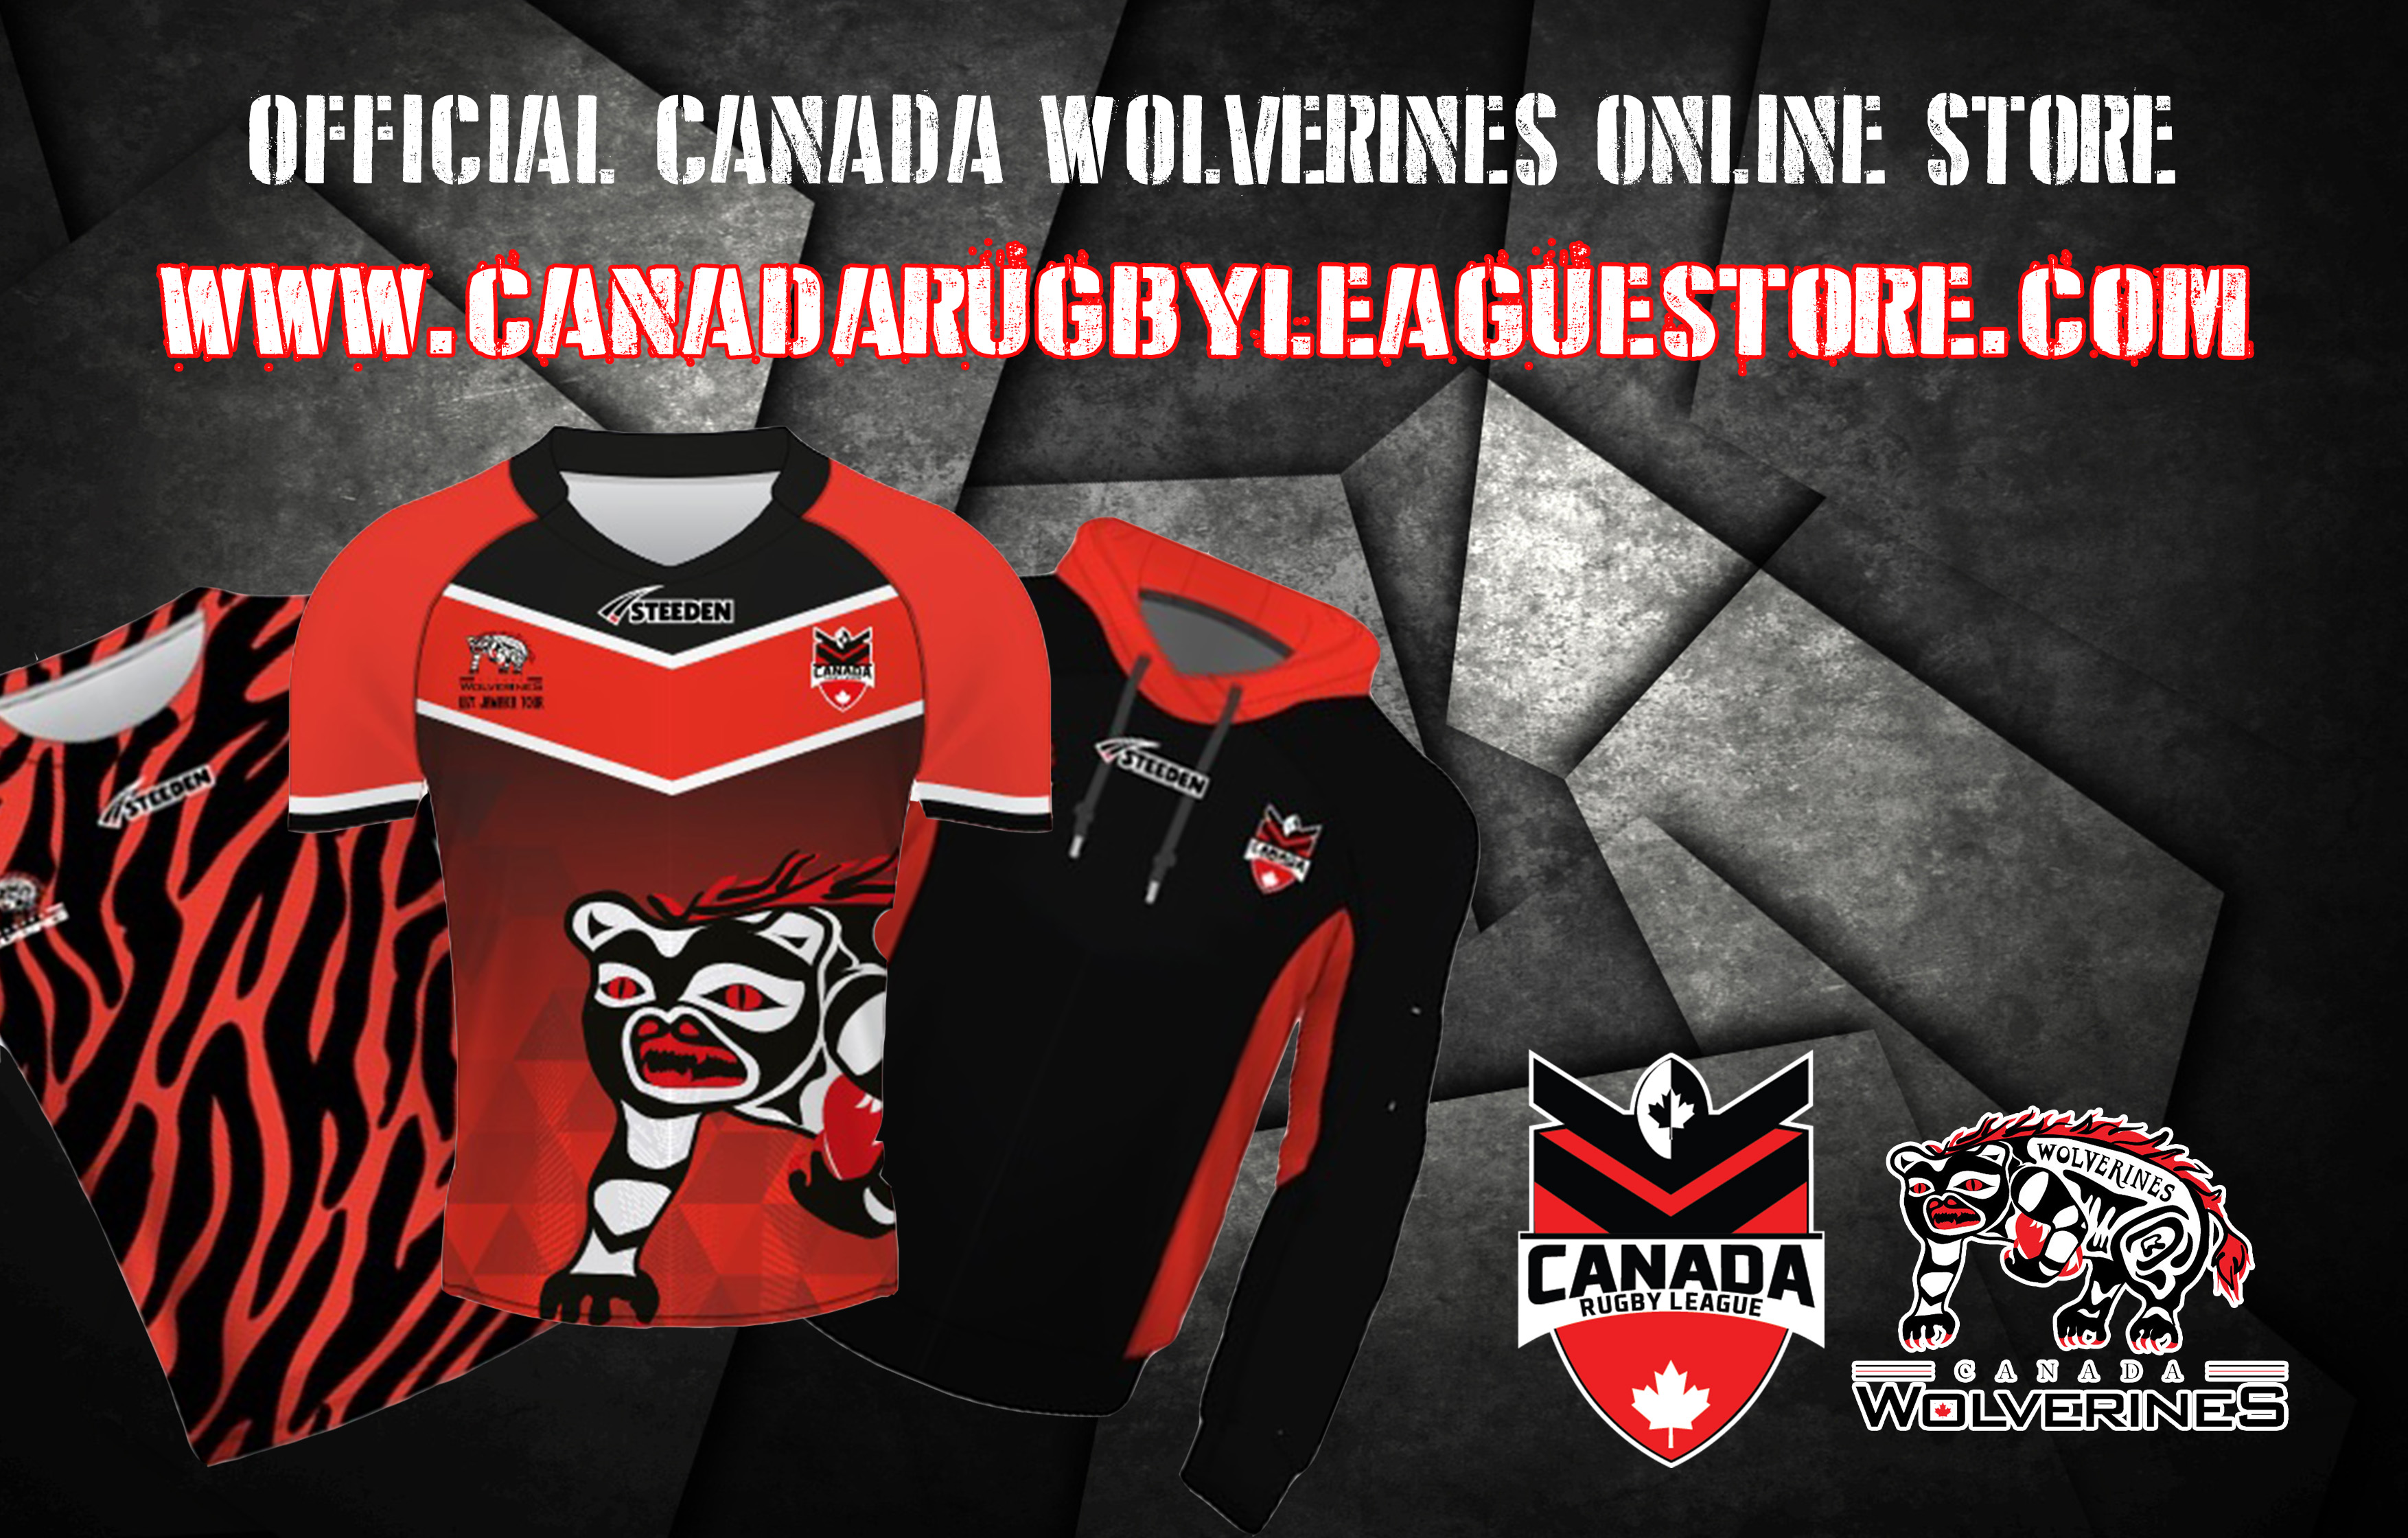 Canada Rugby League Online Store!